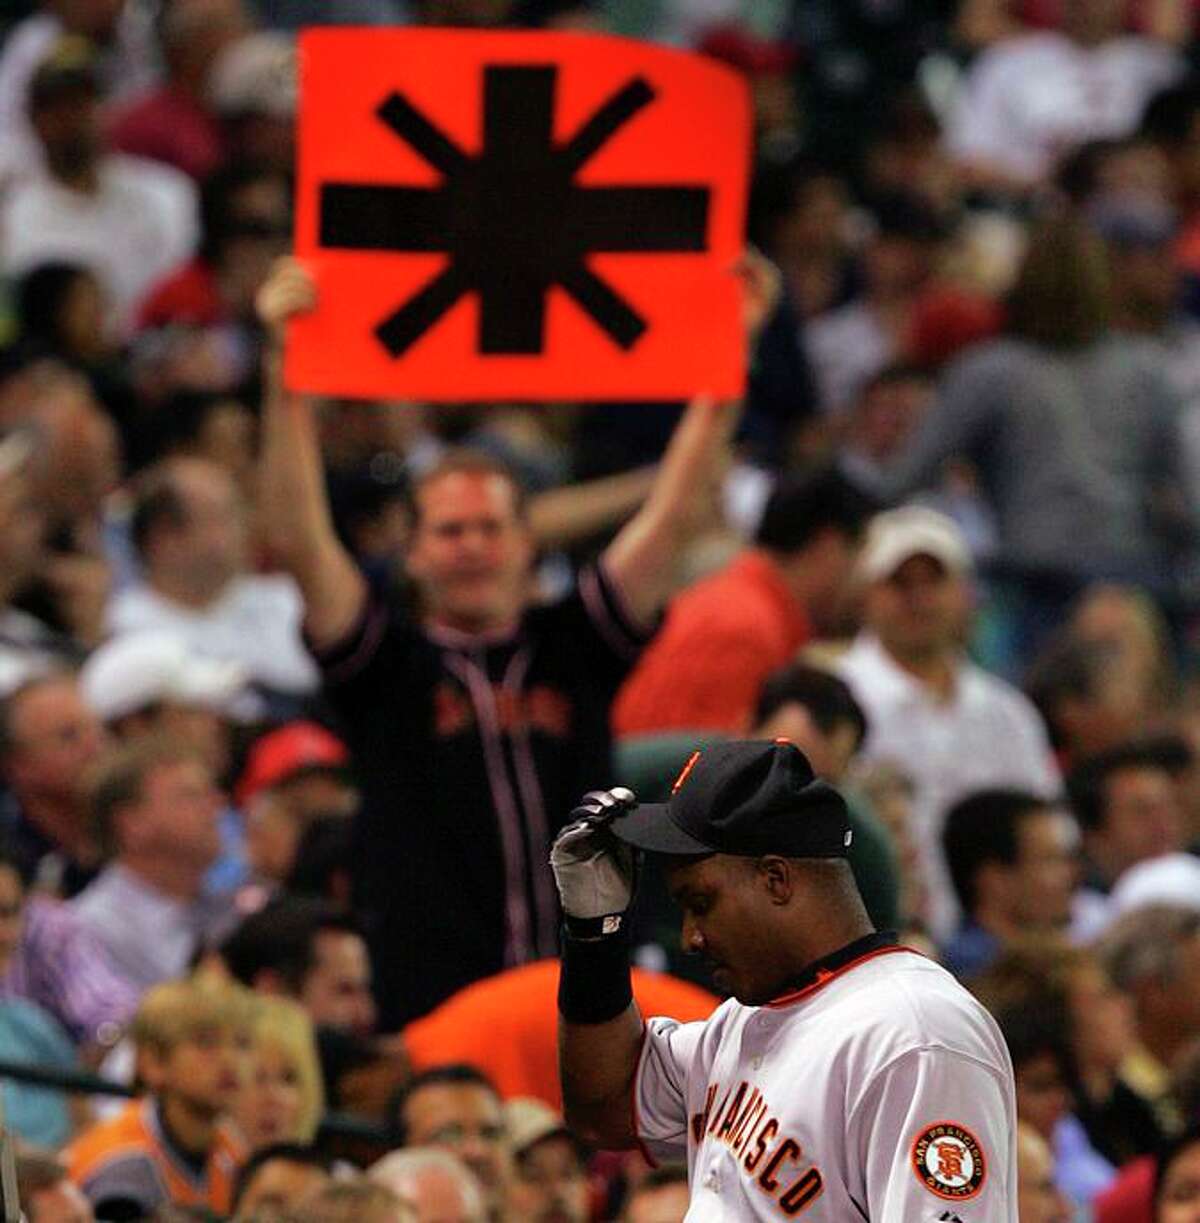 SPORTS - A man holds an asterik sign as Barry Bonds walks off the field Monday May 15, 2006 at Minute Maid Park. Bonds failed to homer in the game, staying one behind Babe Ruth for second place all time. BAHRAM MARK SOBHANI/STAFF